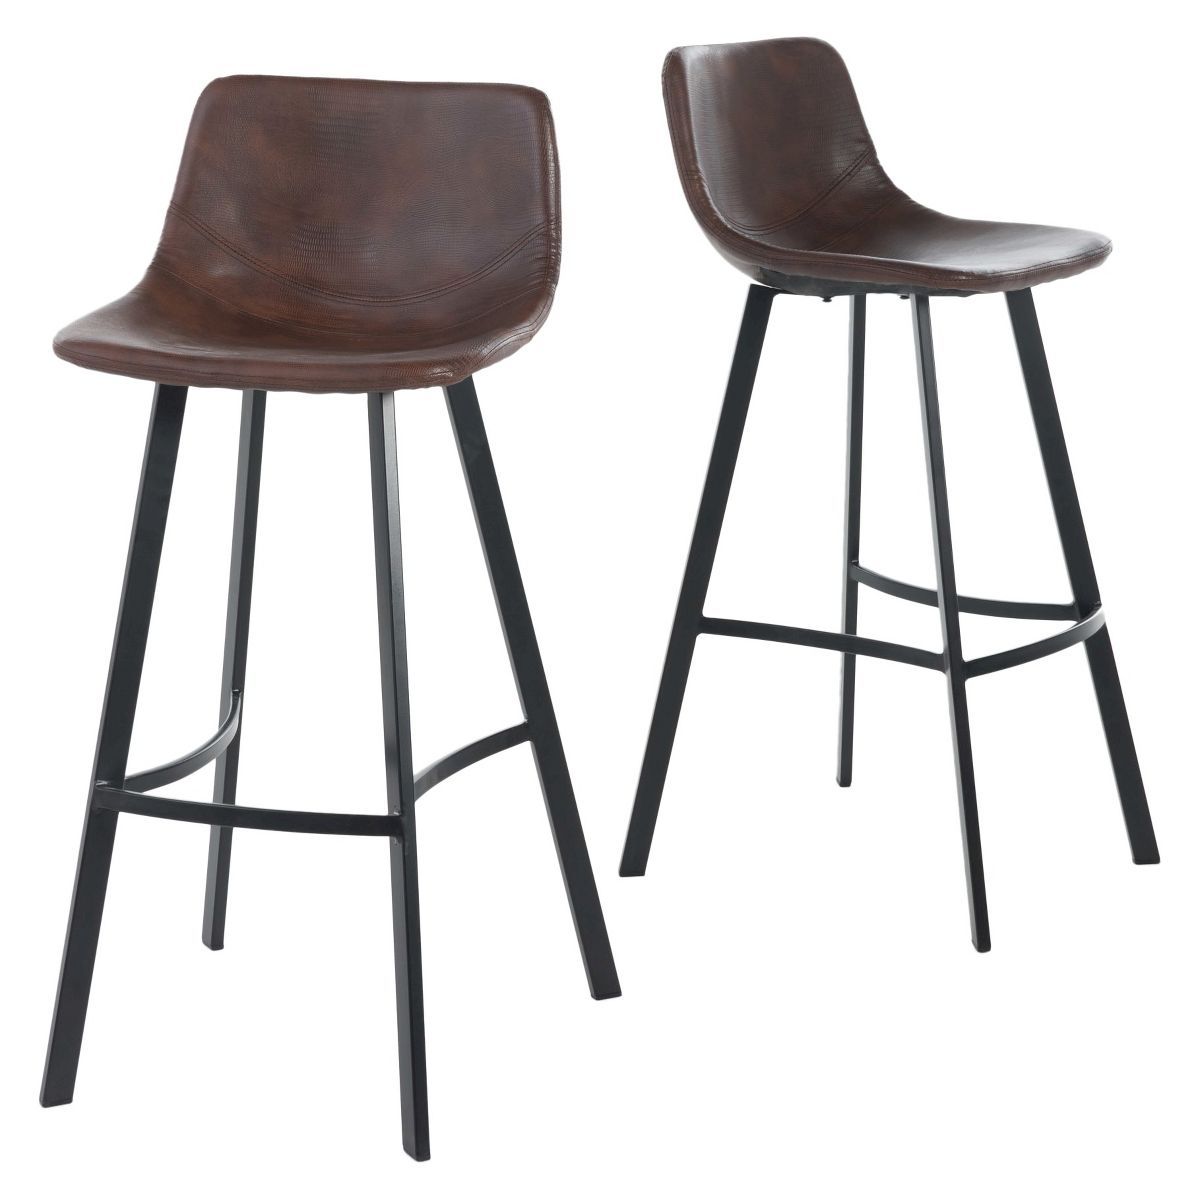 Set of 2 30" Dax Faux Leather Barstool Brown - Christopher Knight Home | Target